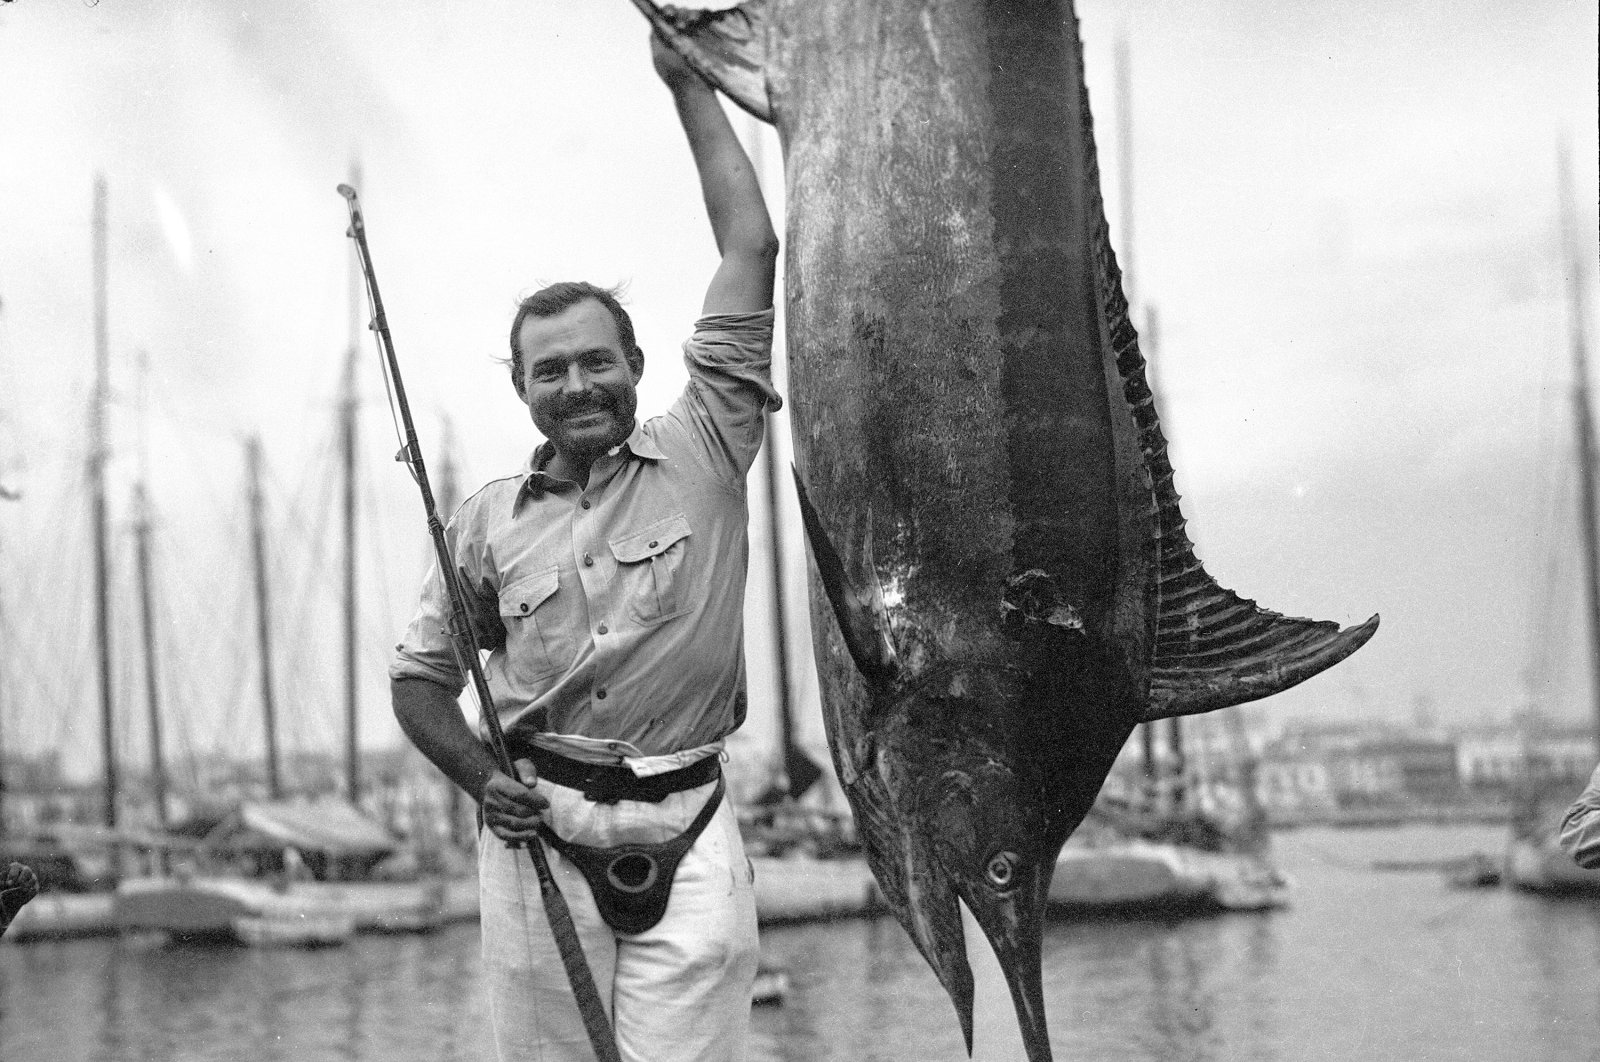 In this July 1934 photo provided by the John F. Kennedy Library Foundation, Ernest Hemingway poses with a marlin at Havana Harbor, in Key West, Florida, U.S. (AP Photo)